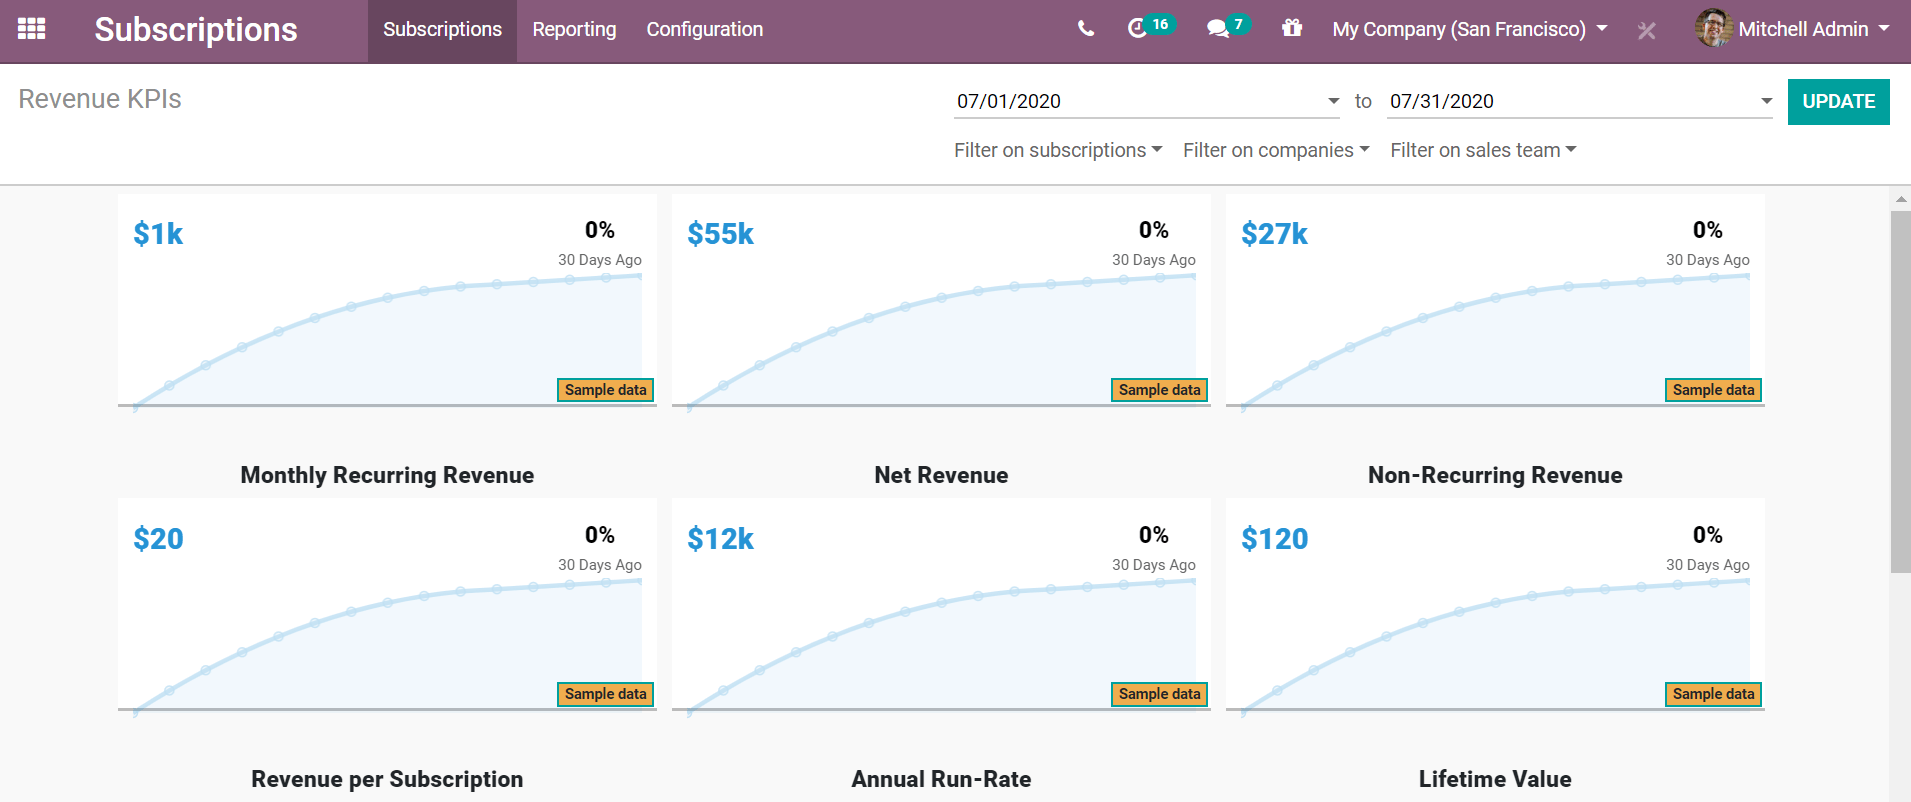 Revenue KPIs report in CoquiAPPs Subscriptions